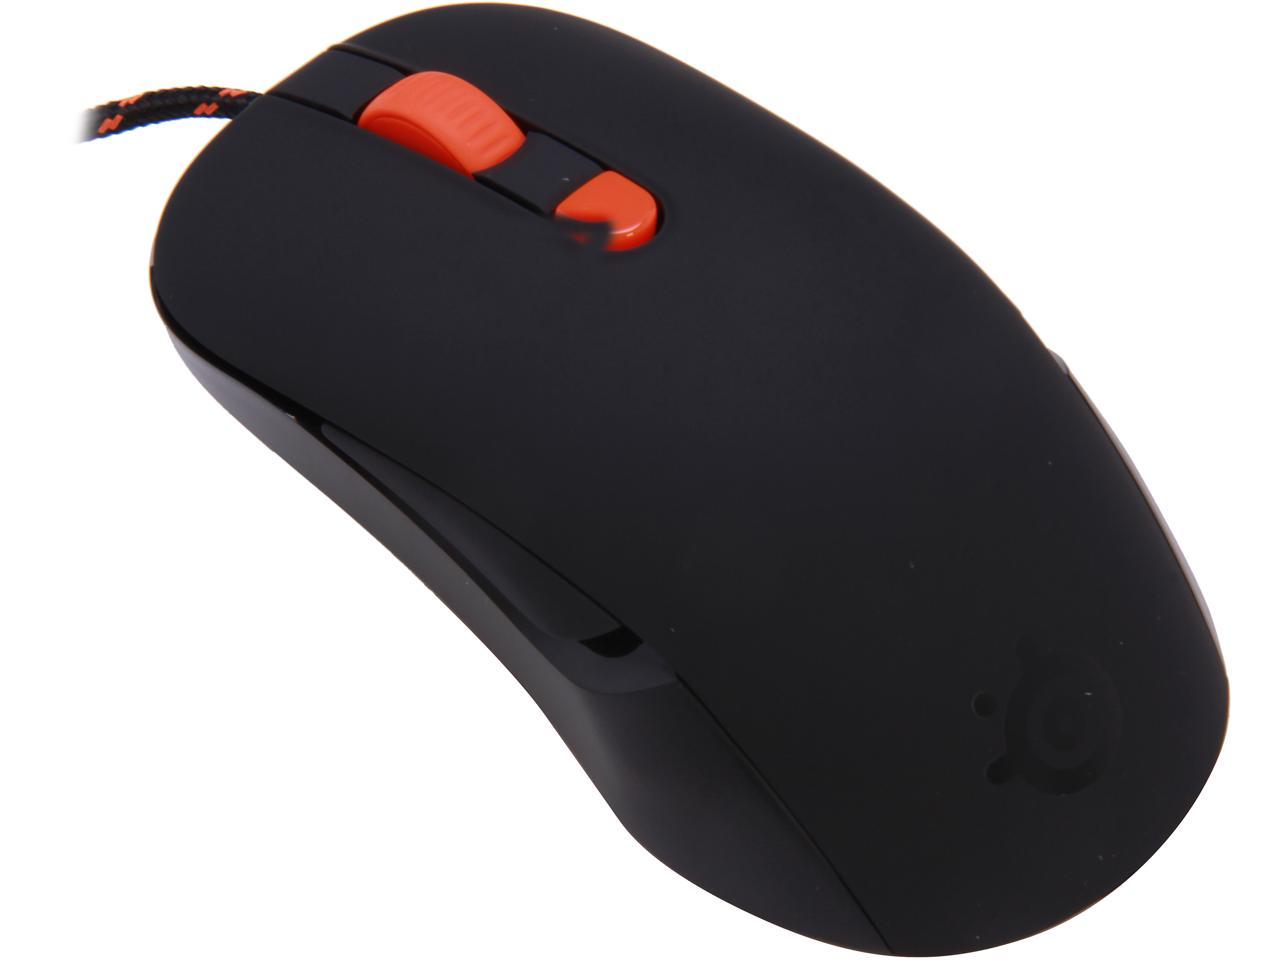 KANA i-Cafe Gaming Optical Wired Mouse Steelseries Bulk type 62032 Black 